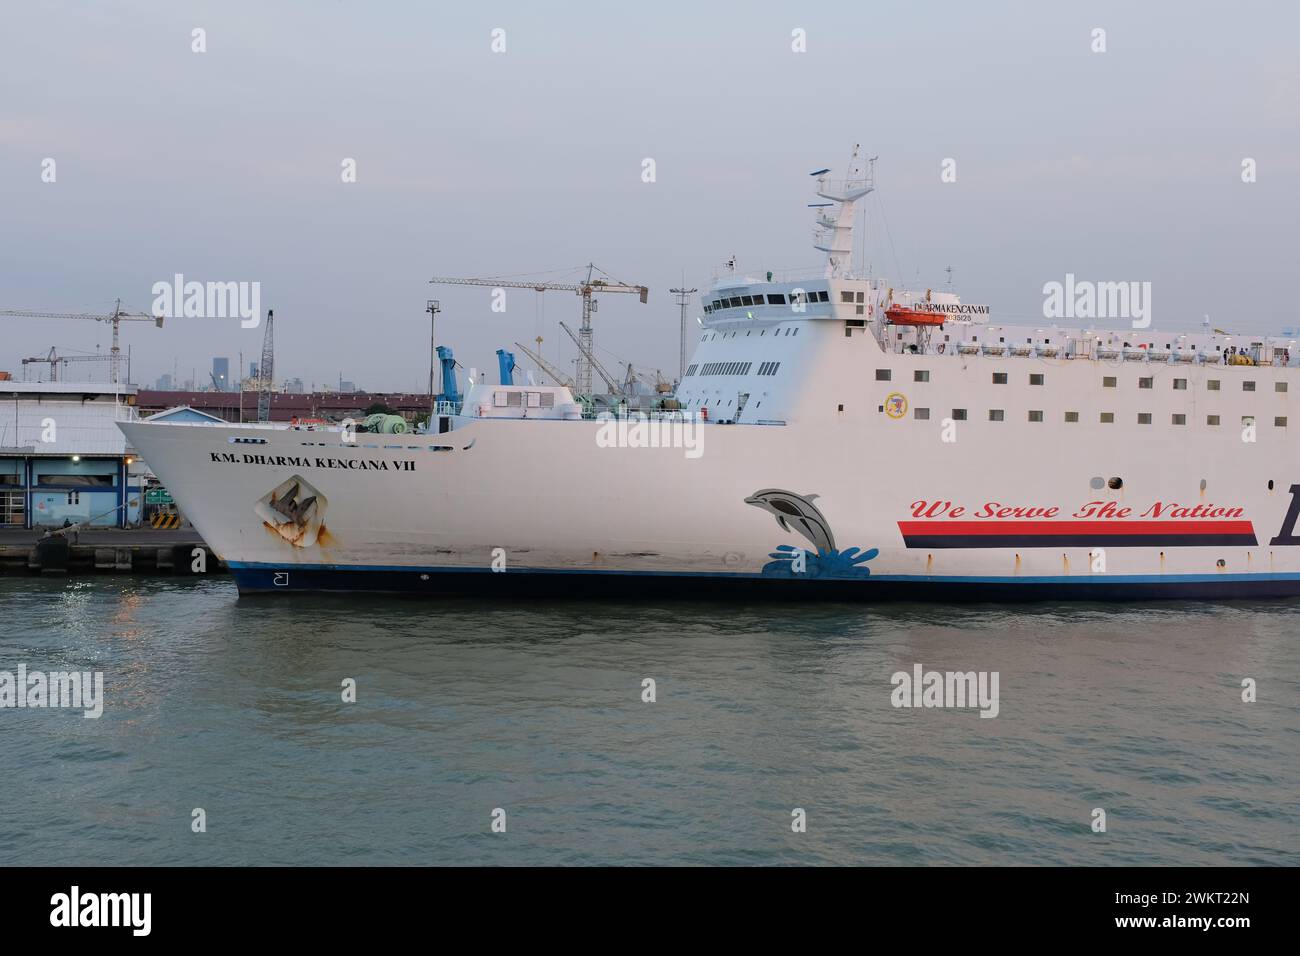 Surabaya, Indonesia, July 27, 2023: Large passenger ships dock at the port to load and unload passengers and goods. water transportation Stock Photo